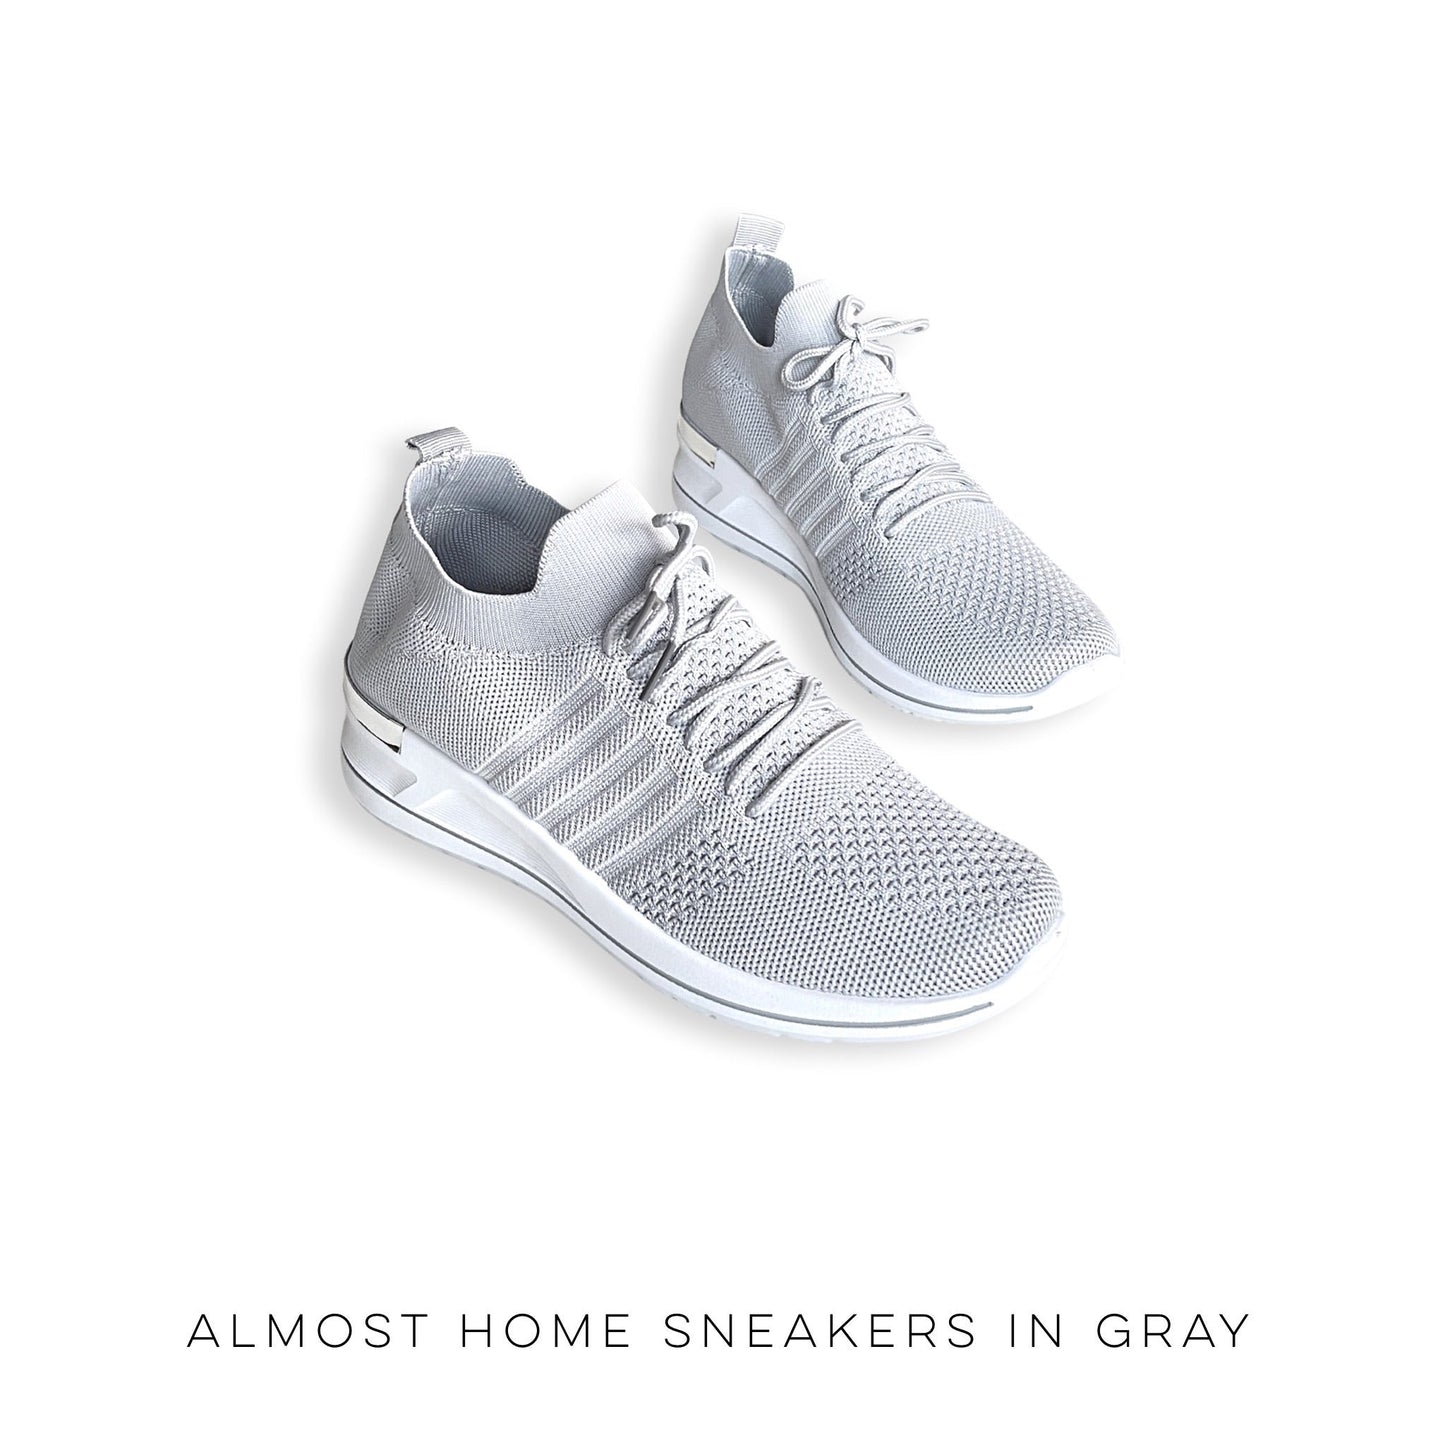 Almost Home Sneakers in Gray